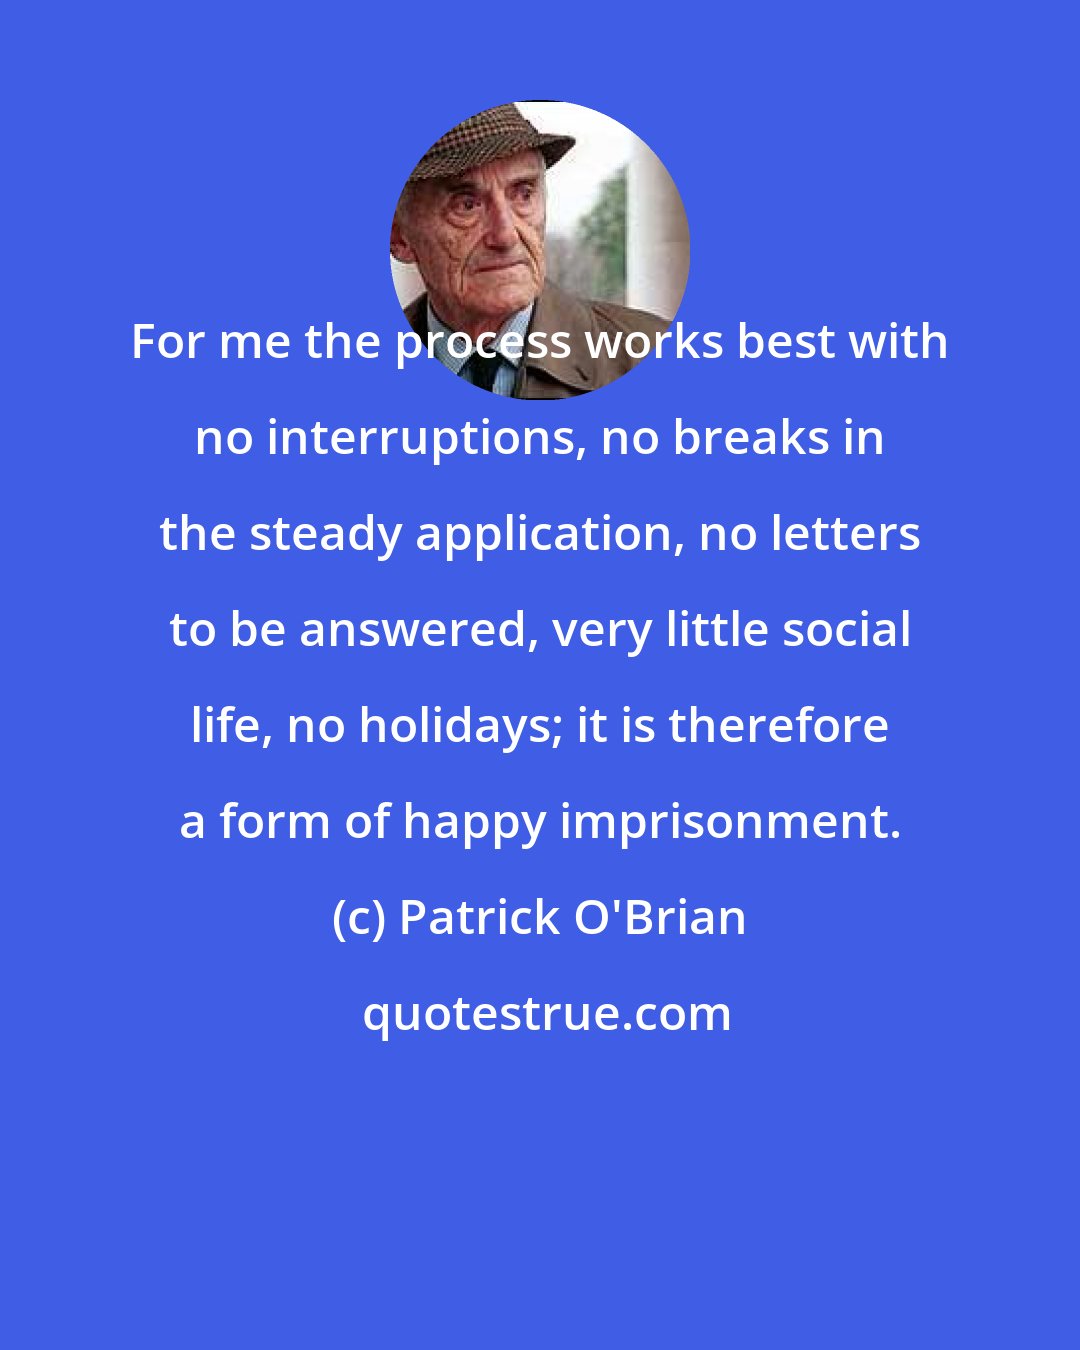 Patrick O'Brian: For me the process works best with no interruptions, no breaks in the steady application, no letters to be answered, very little social life, no holidays; it is therefore a form of happy imprisonment.